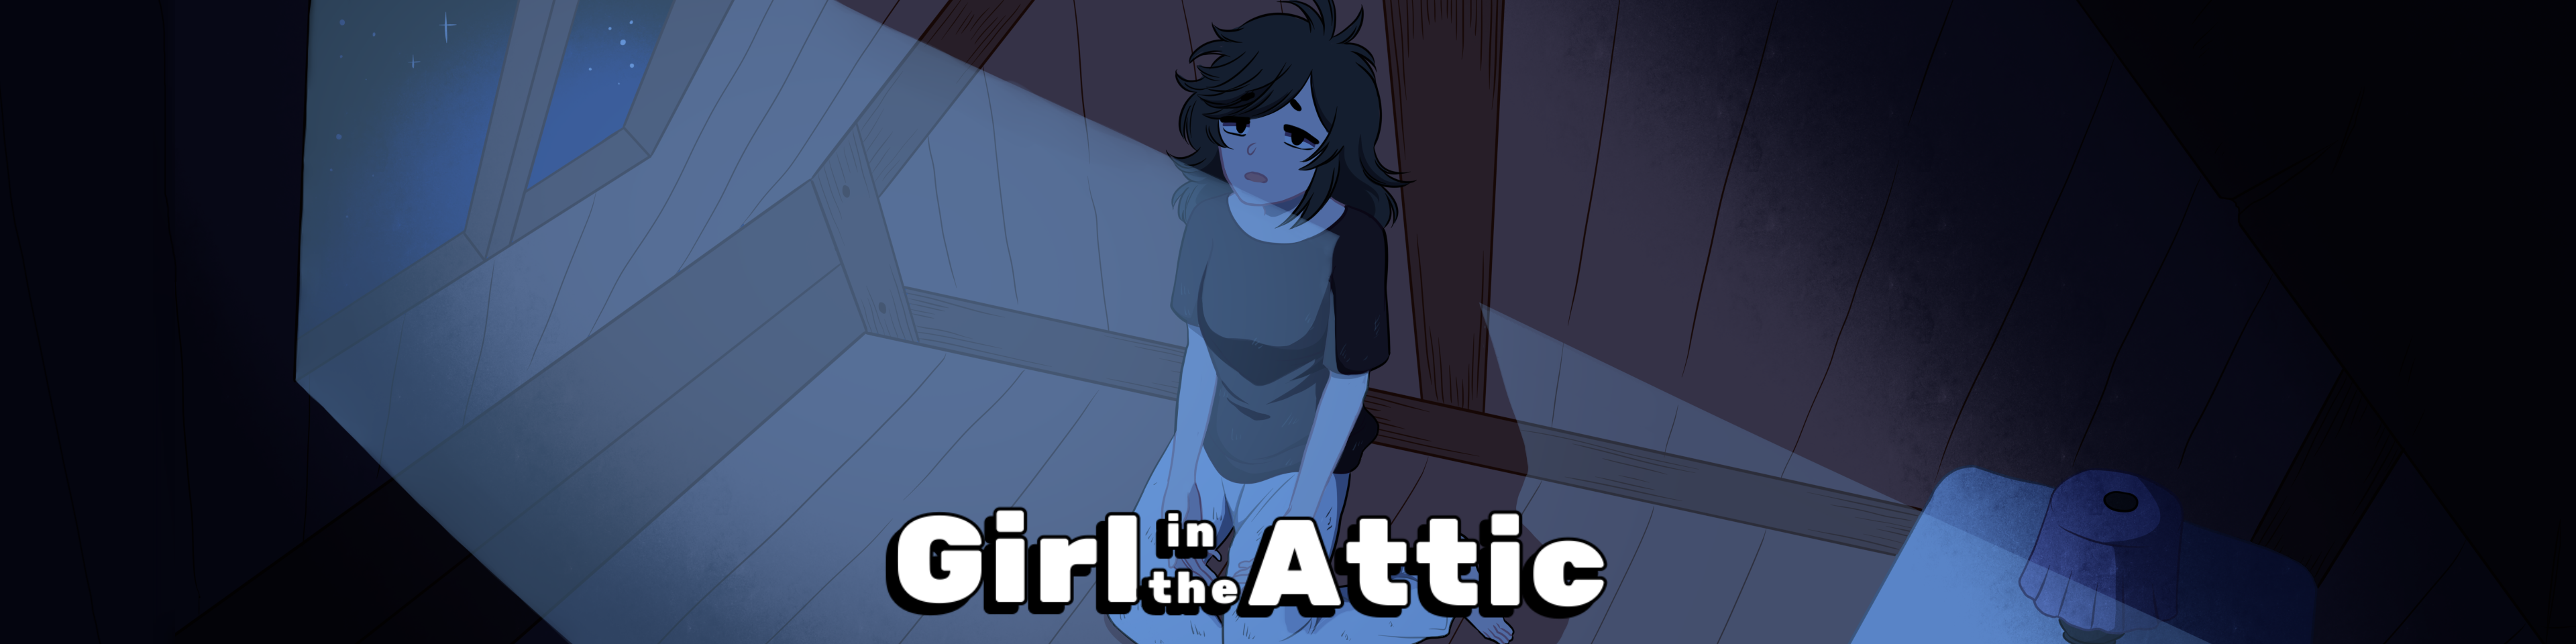 Girl in the Attic [Remastered]